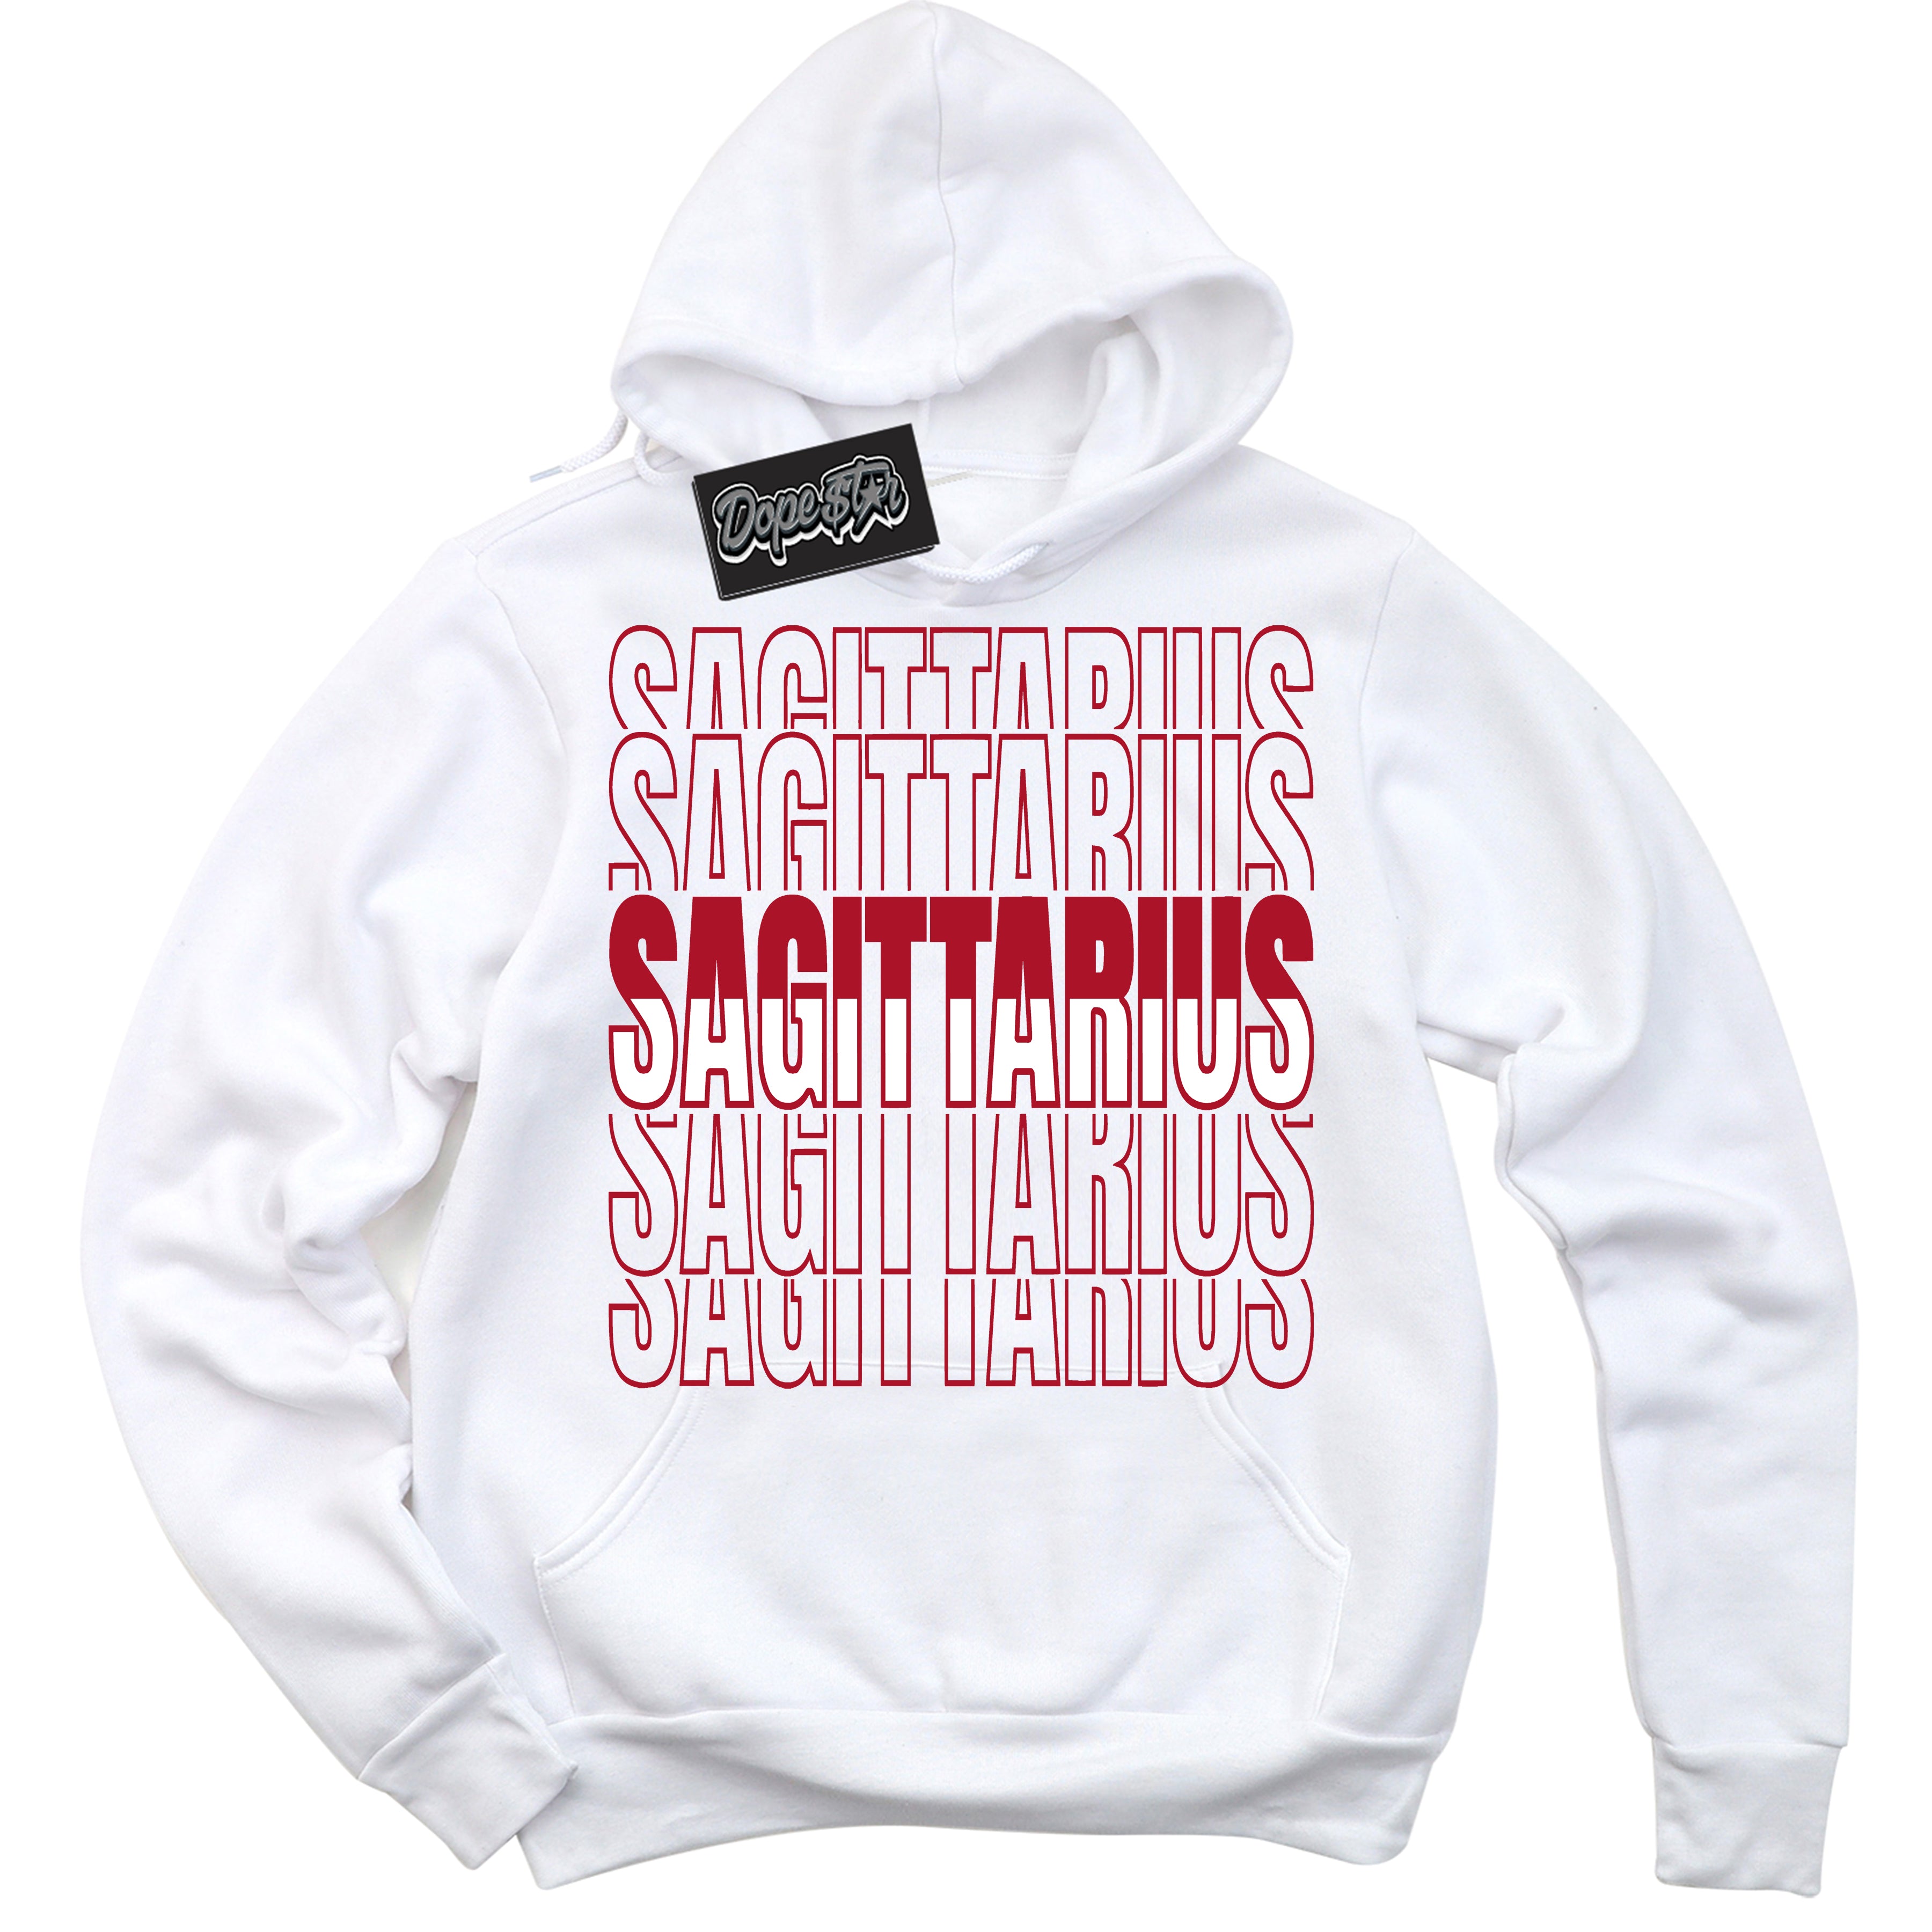 Cool White Hoodie with “ Sagittarius ”  design that Perfectly Matches  Reverse Ultraman Sneakers.